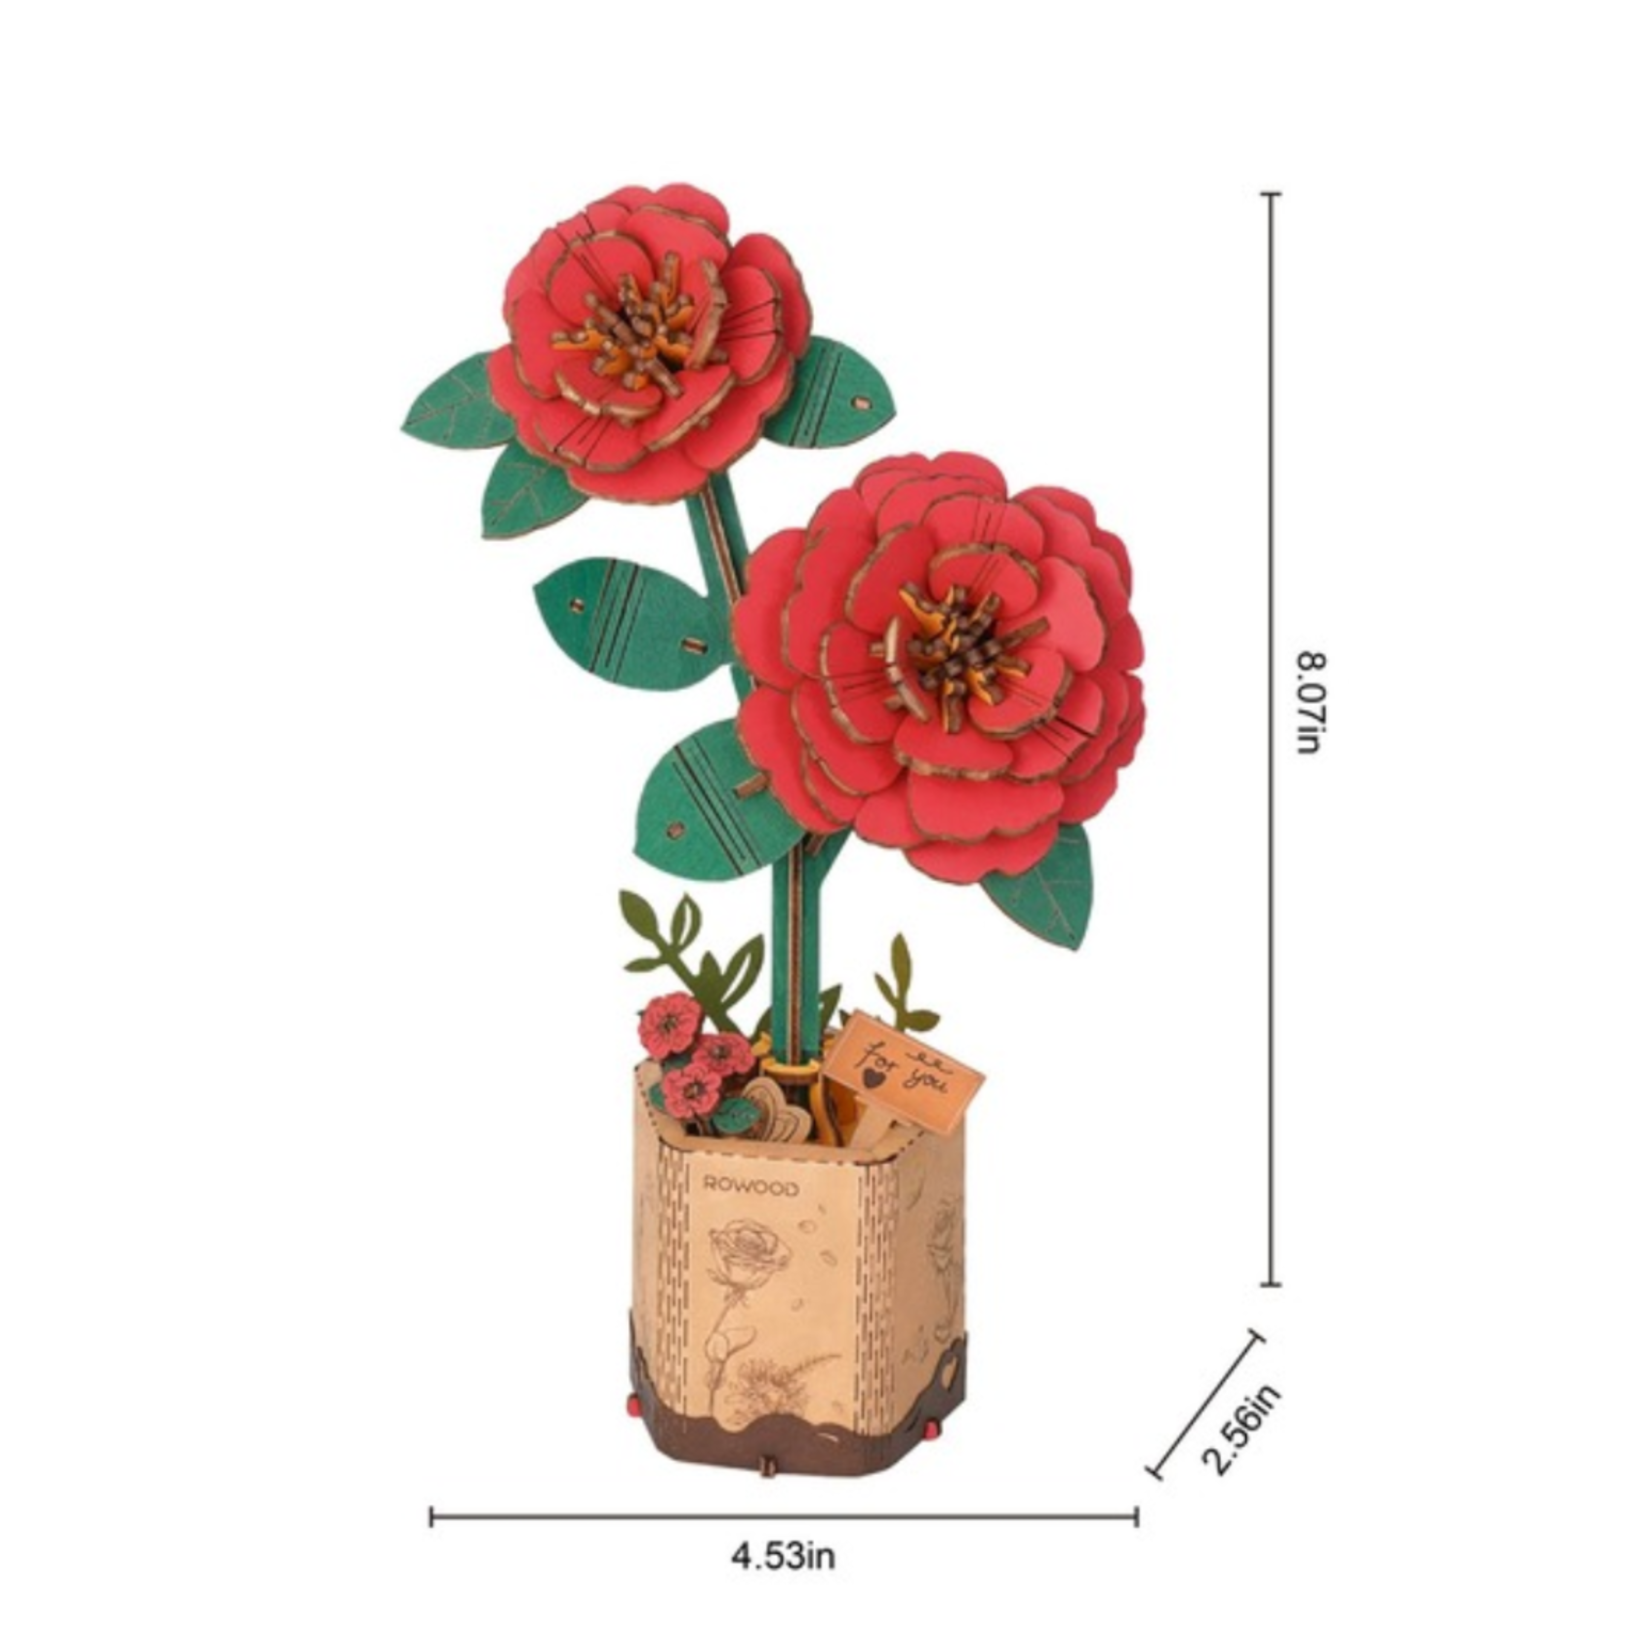 HANDS CRAFT 3D WOOD PUZZLE RED CAMELLIA